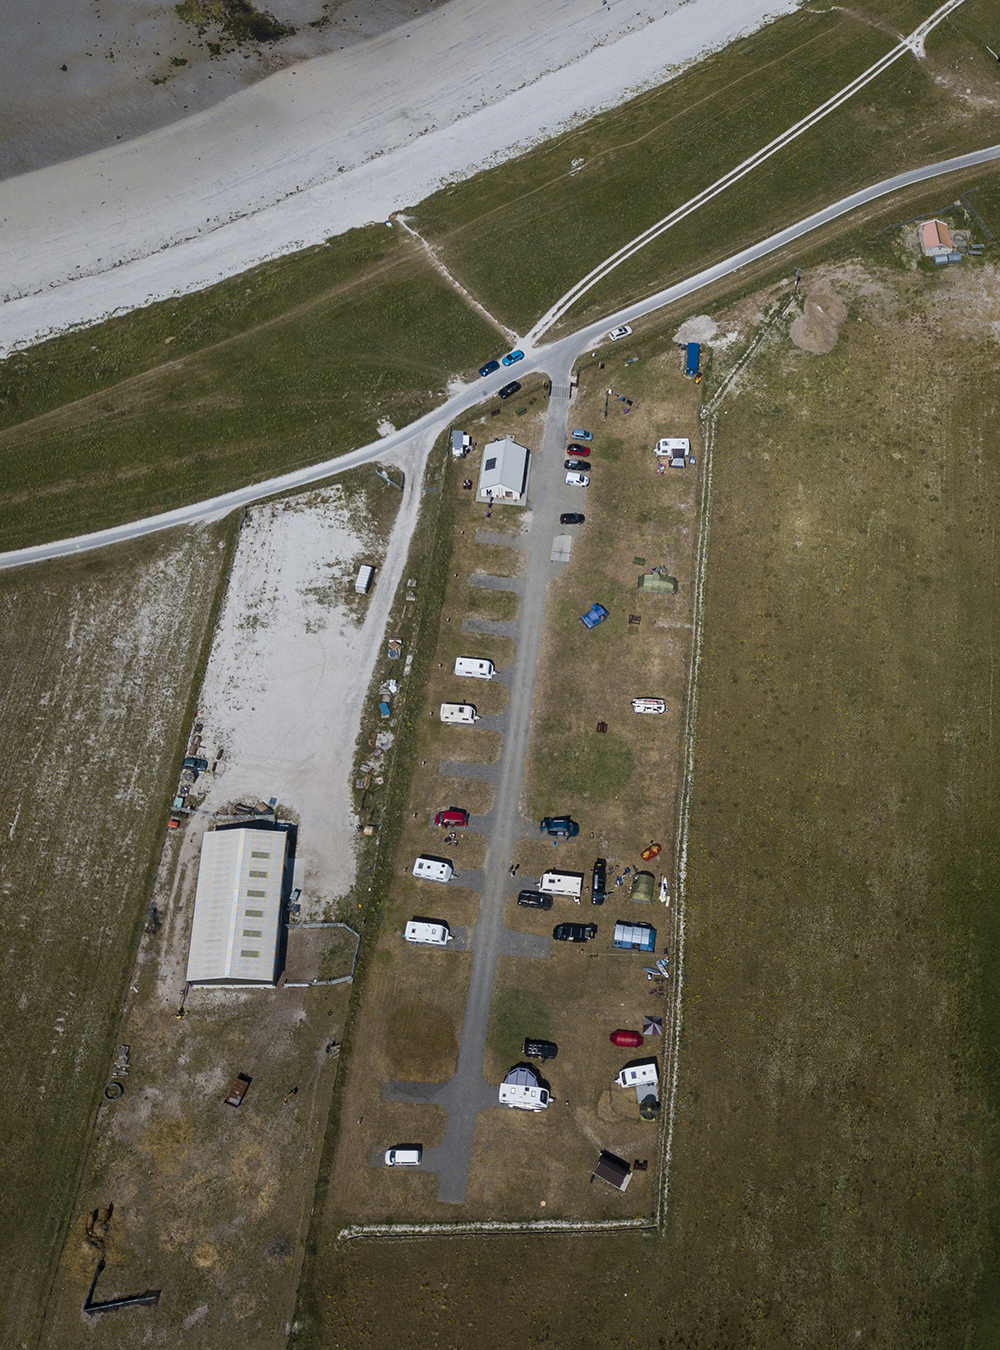 Balranald Campsite at North Uist from the air